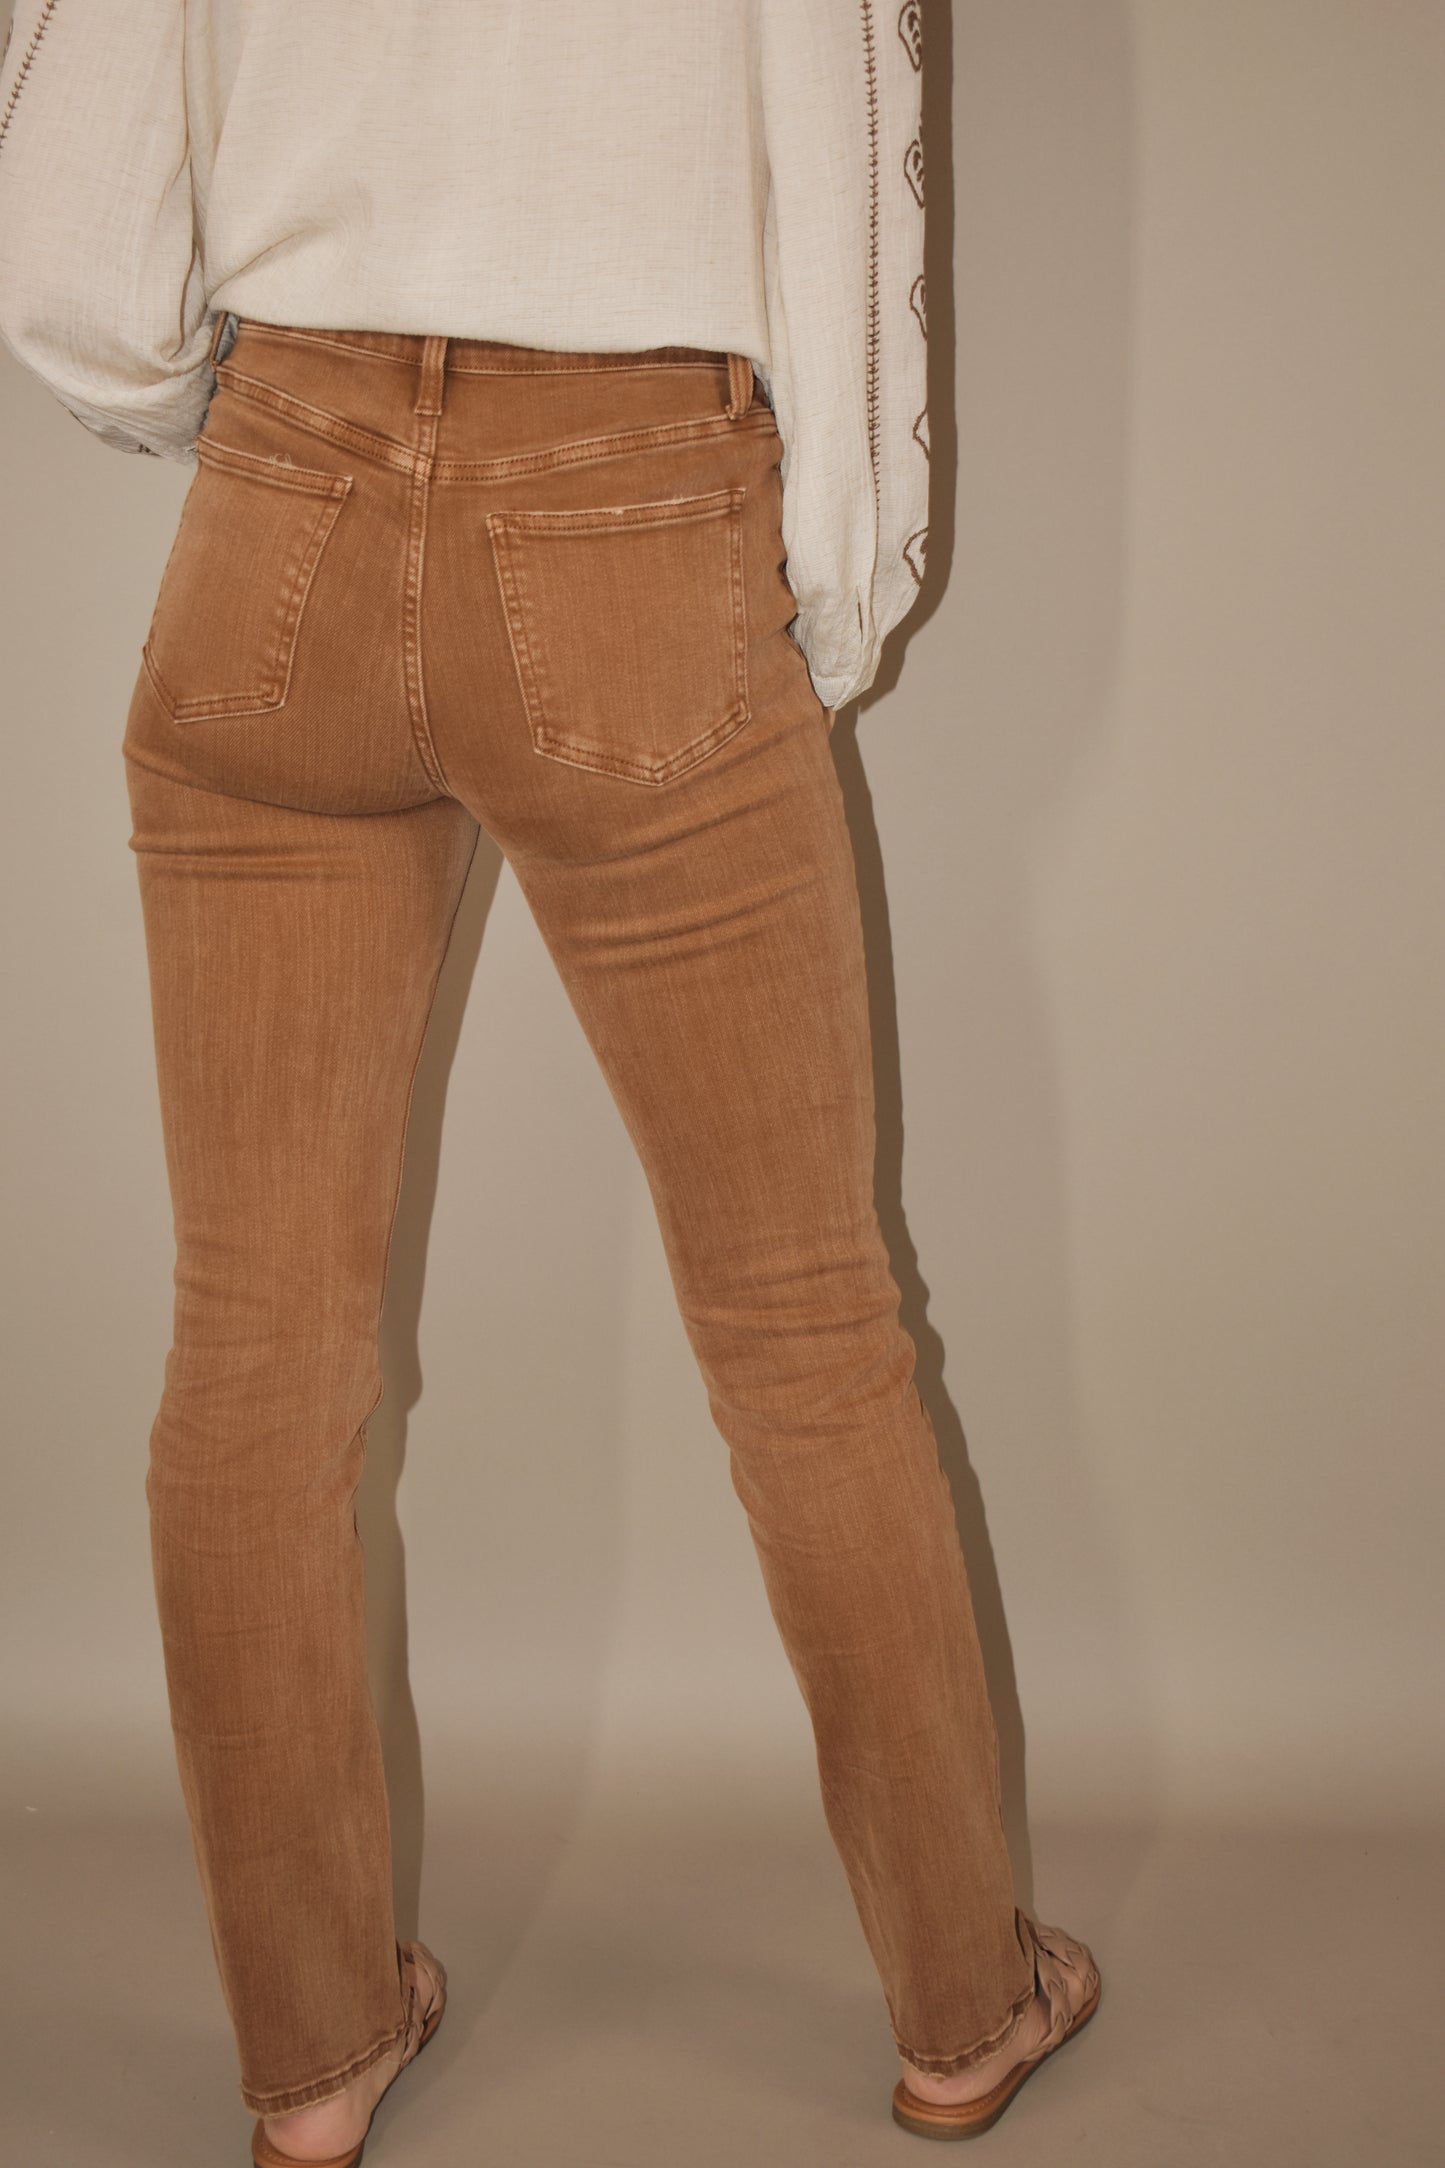 Toffee colored denim. Stretch denim. High waisted. Slim straight leg, full length. No holes or distressing. Zip and button enclosure. 